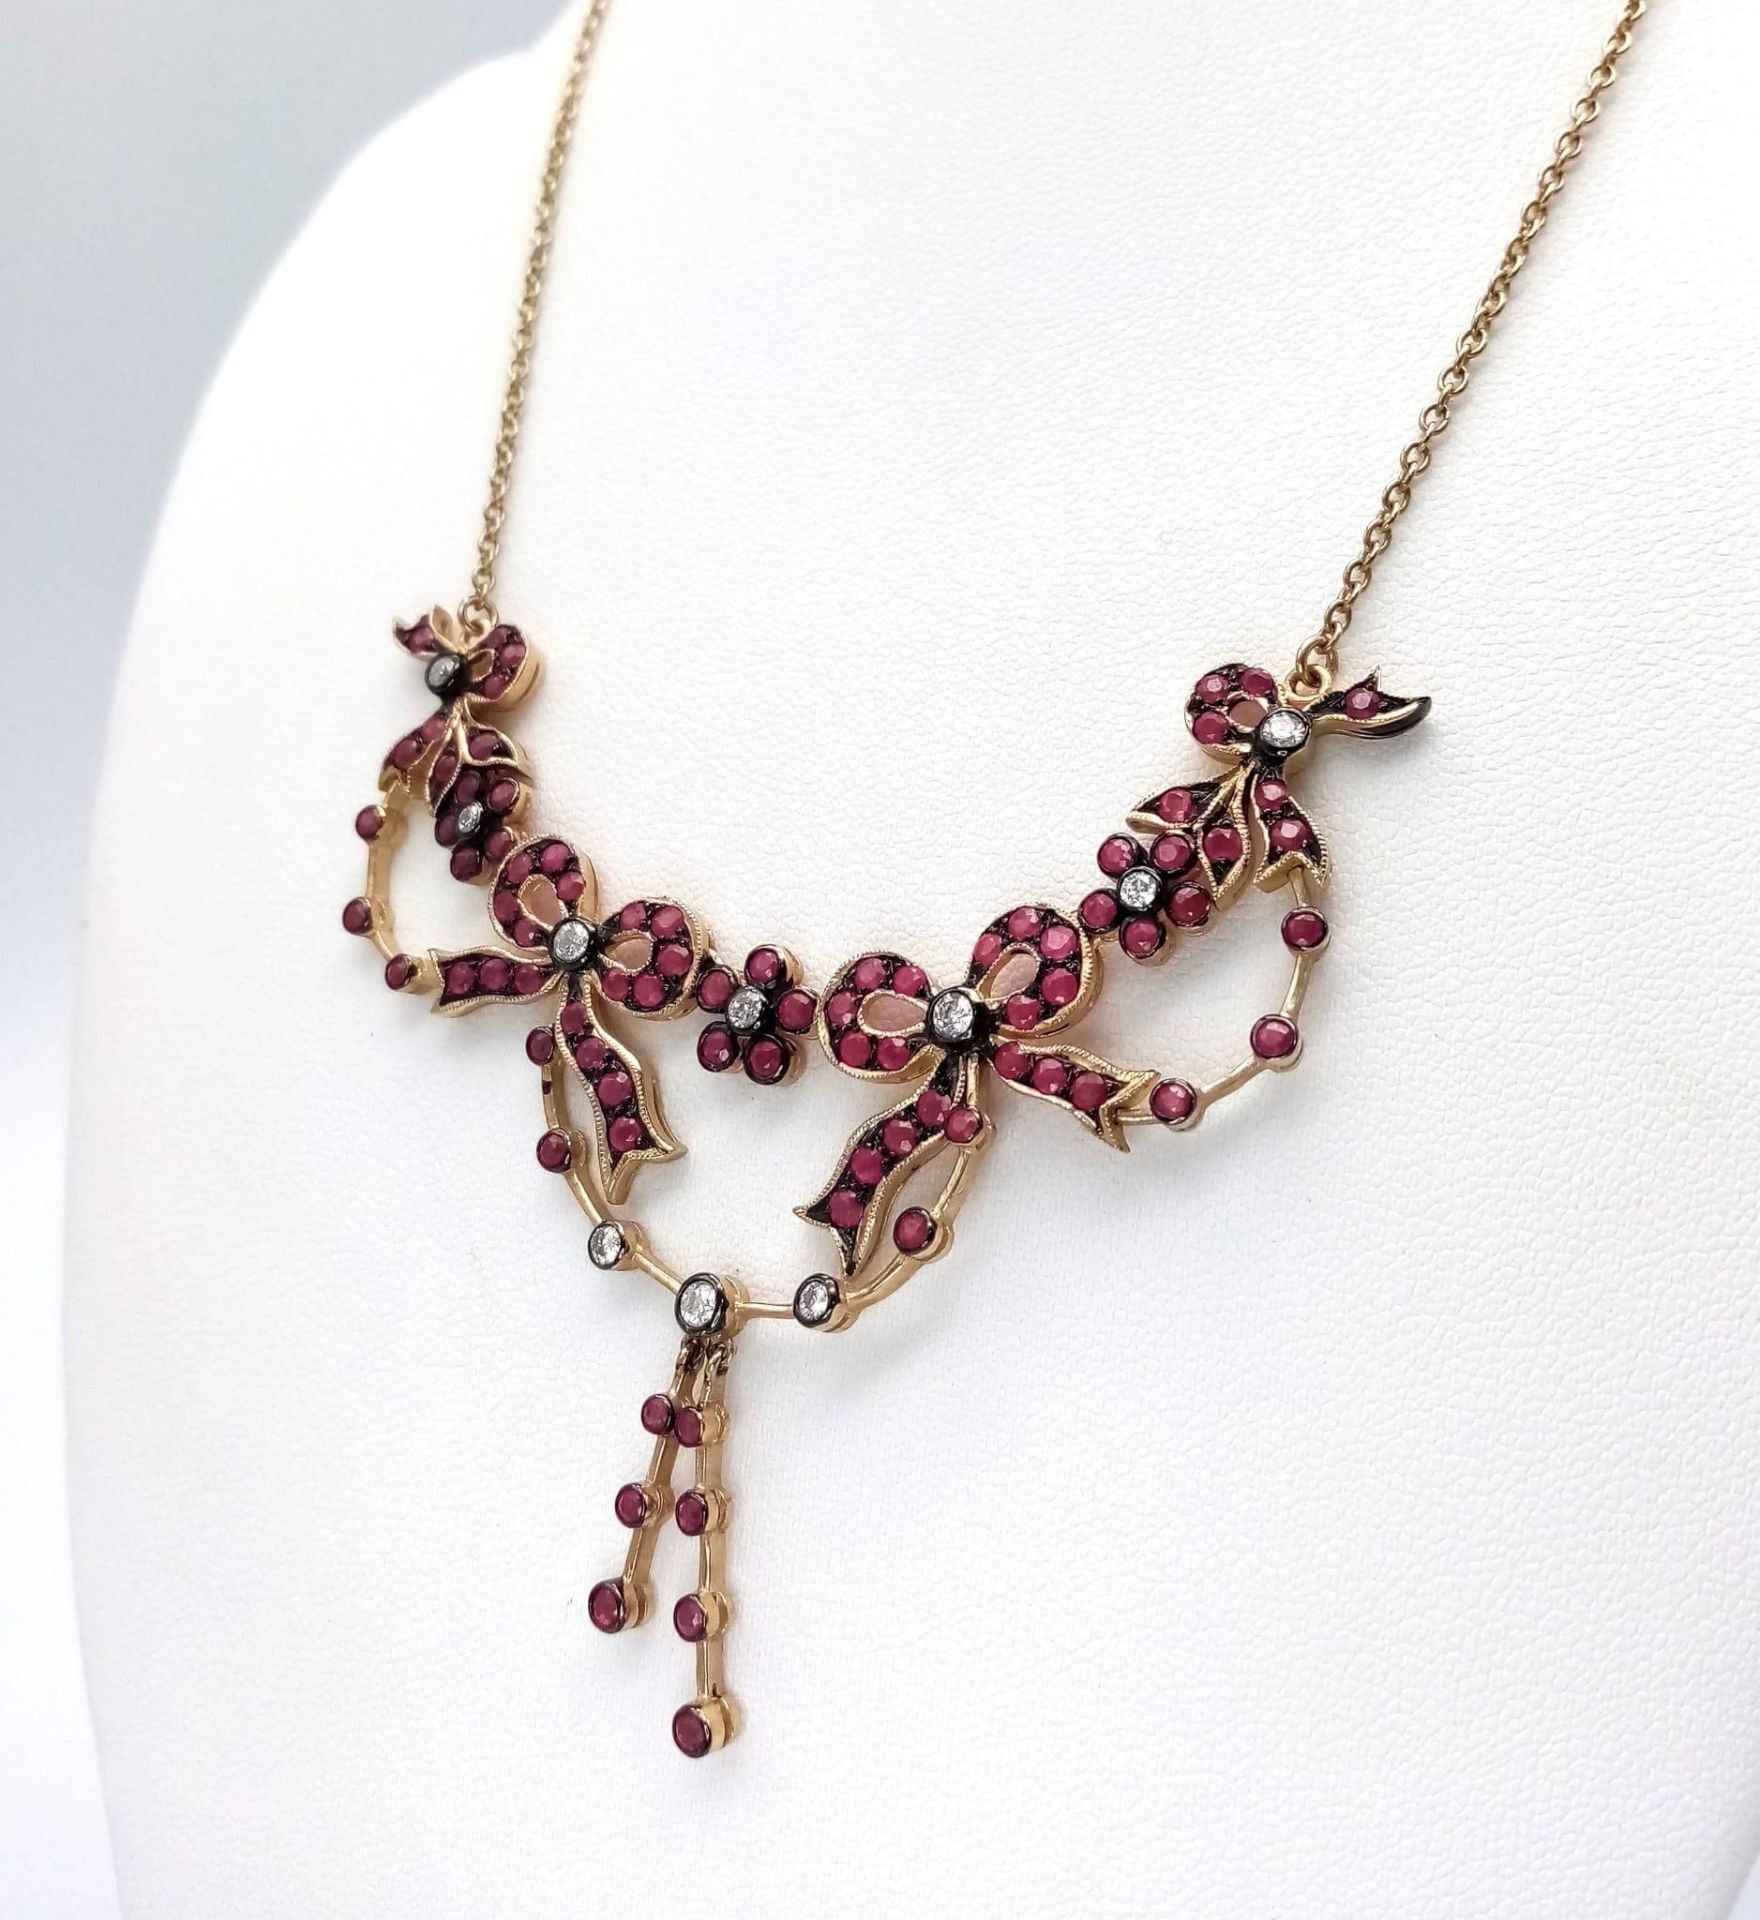 An Art Deco Style 9K Yellow Gold Ruby and Diamond Lavaliere Necklace. Floral and bow decoration. - Image 4 of 7